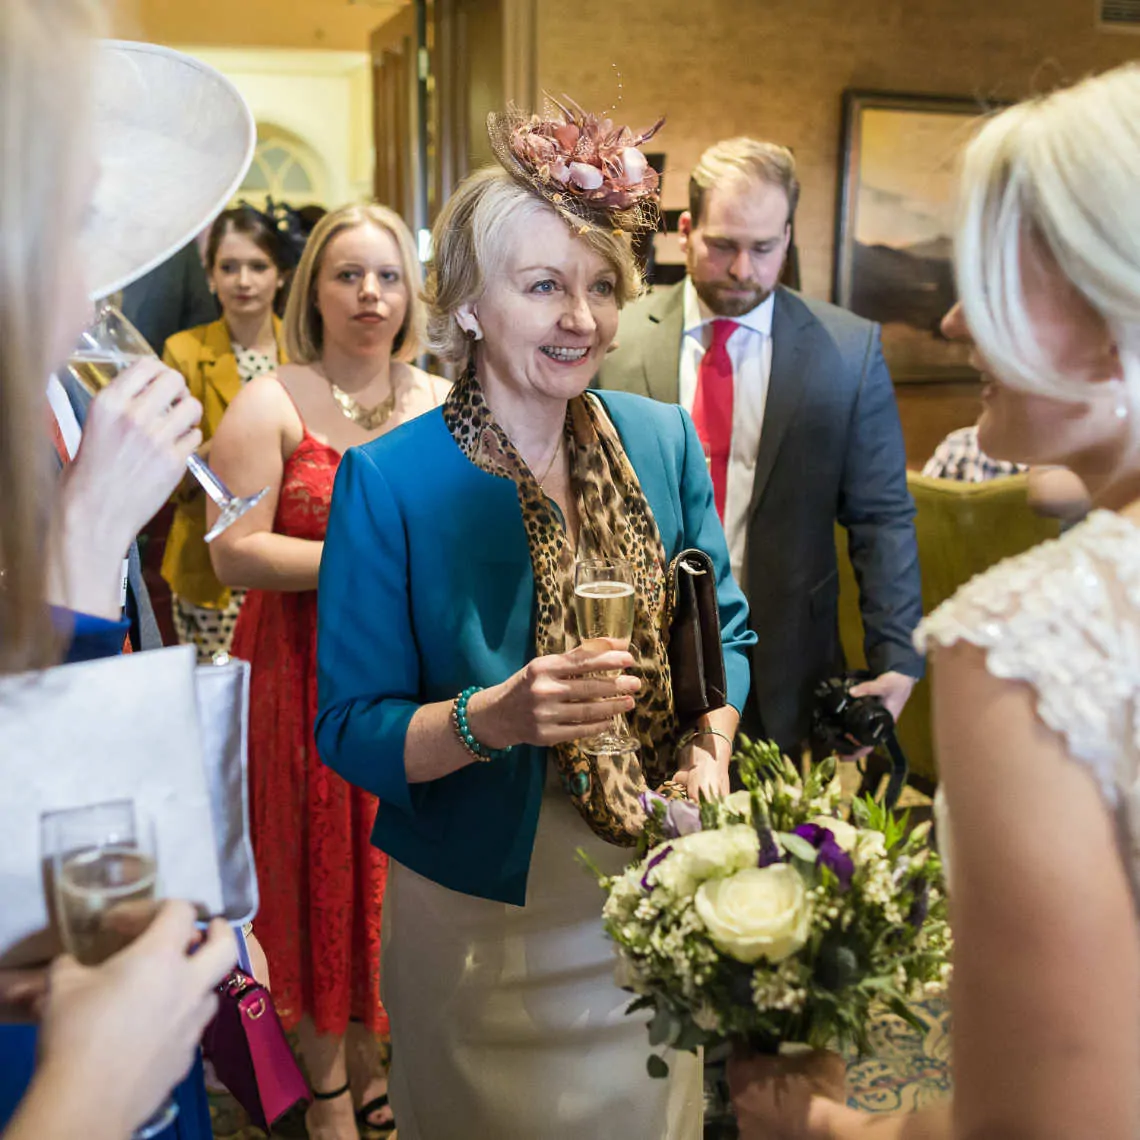 Guest smiling at bride at drinks reception